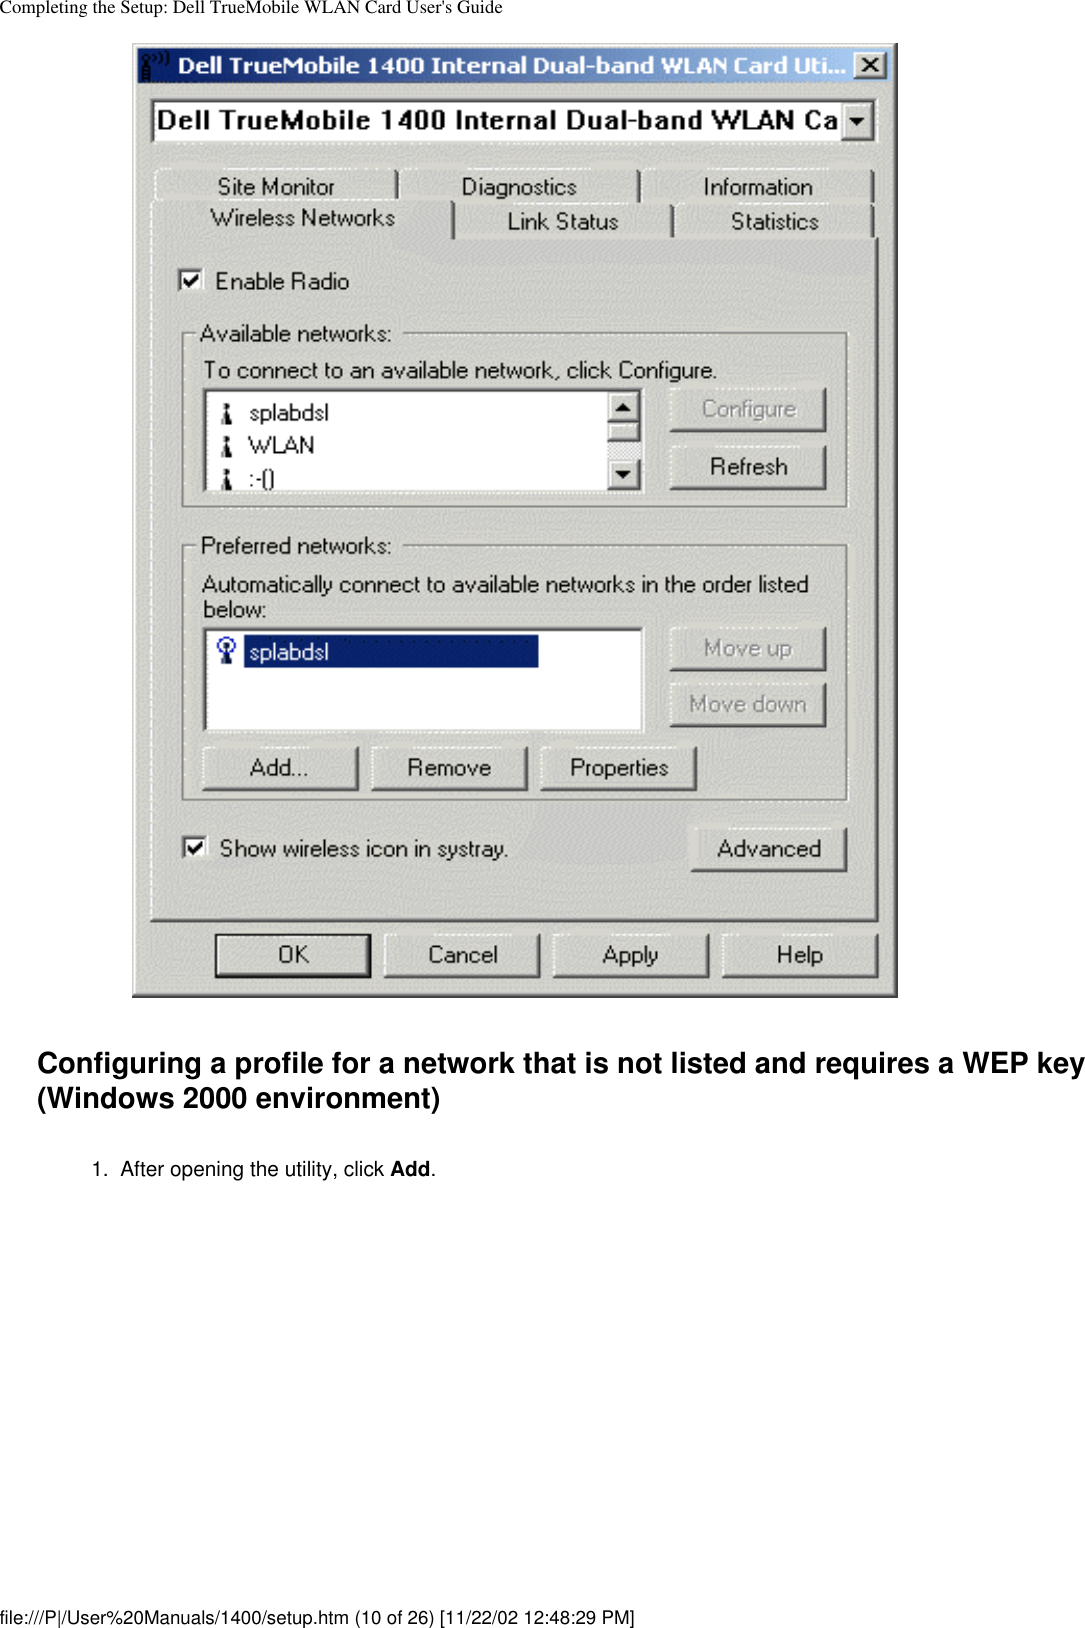 Completing the Setup: Dell TrueMobile WLAN Card User&apos;s GuideConfiguring a profile for a network that is not listed and requires a WEP key (Windows 2000 environment)1.  After opening the utility, click Add. file:///P|/User%20Manuals/1400/setup.htm (10 of 26) [11/22/02 12:48:29 PM]